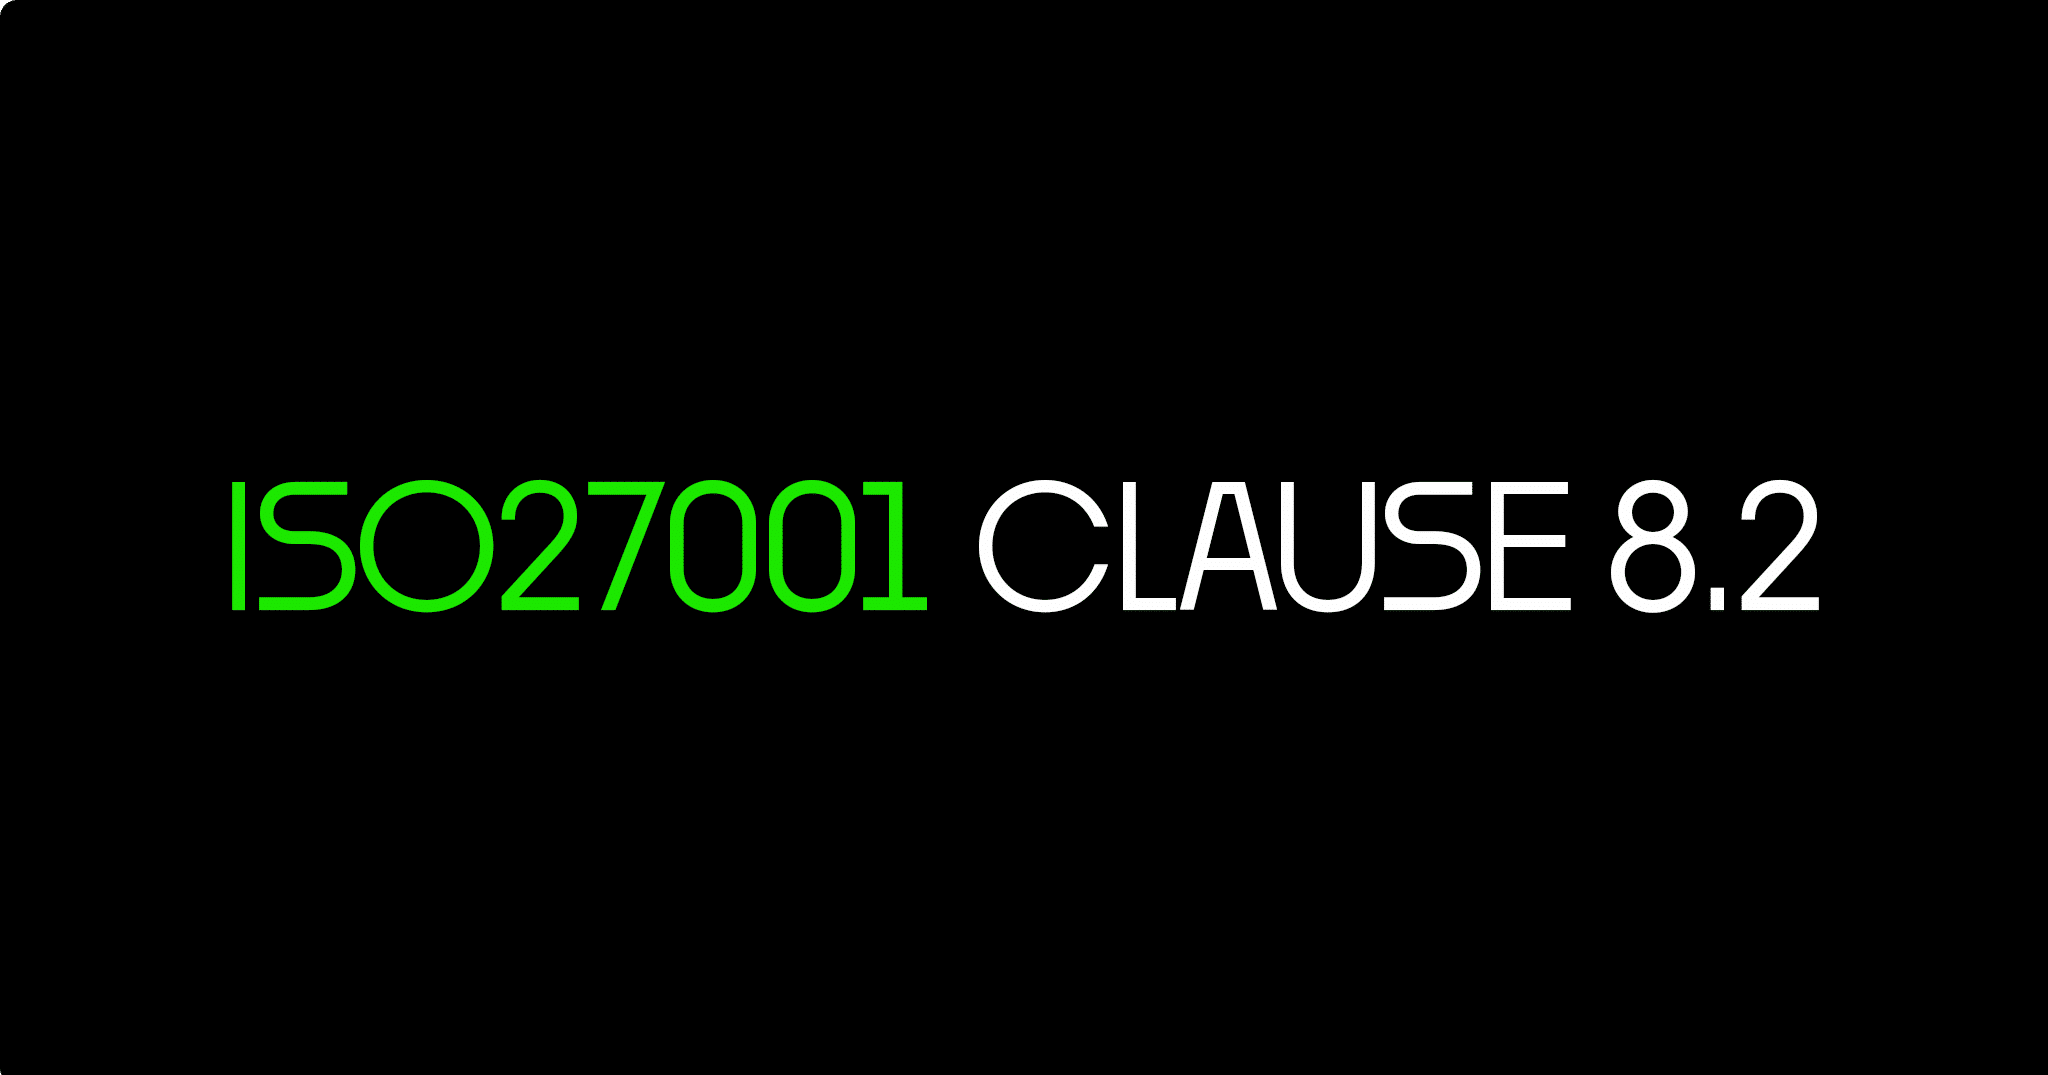 ISO 27001 Clause 8.2 Information Security Risk Assessment – Ultimate Certification Guide